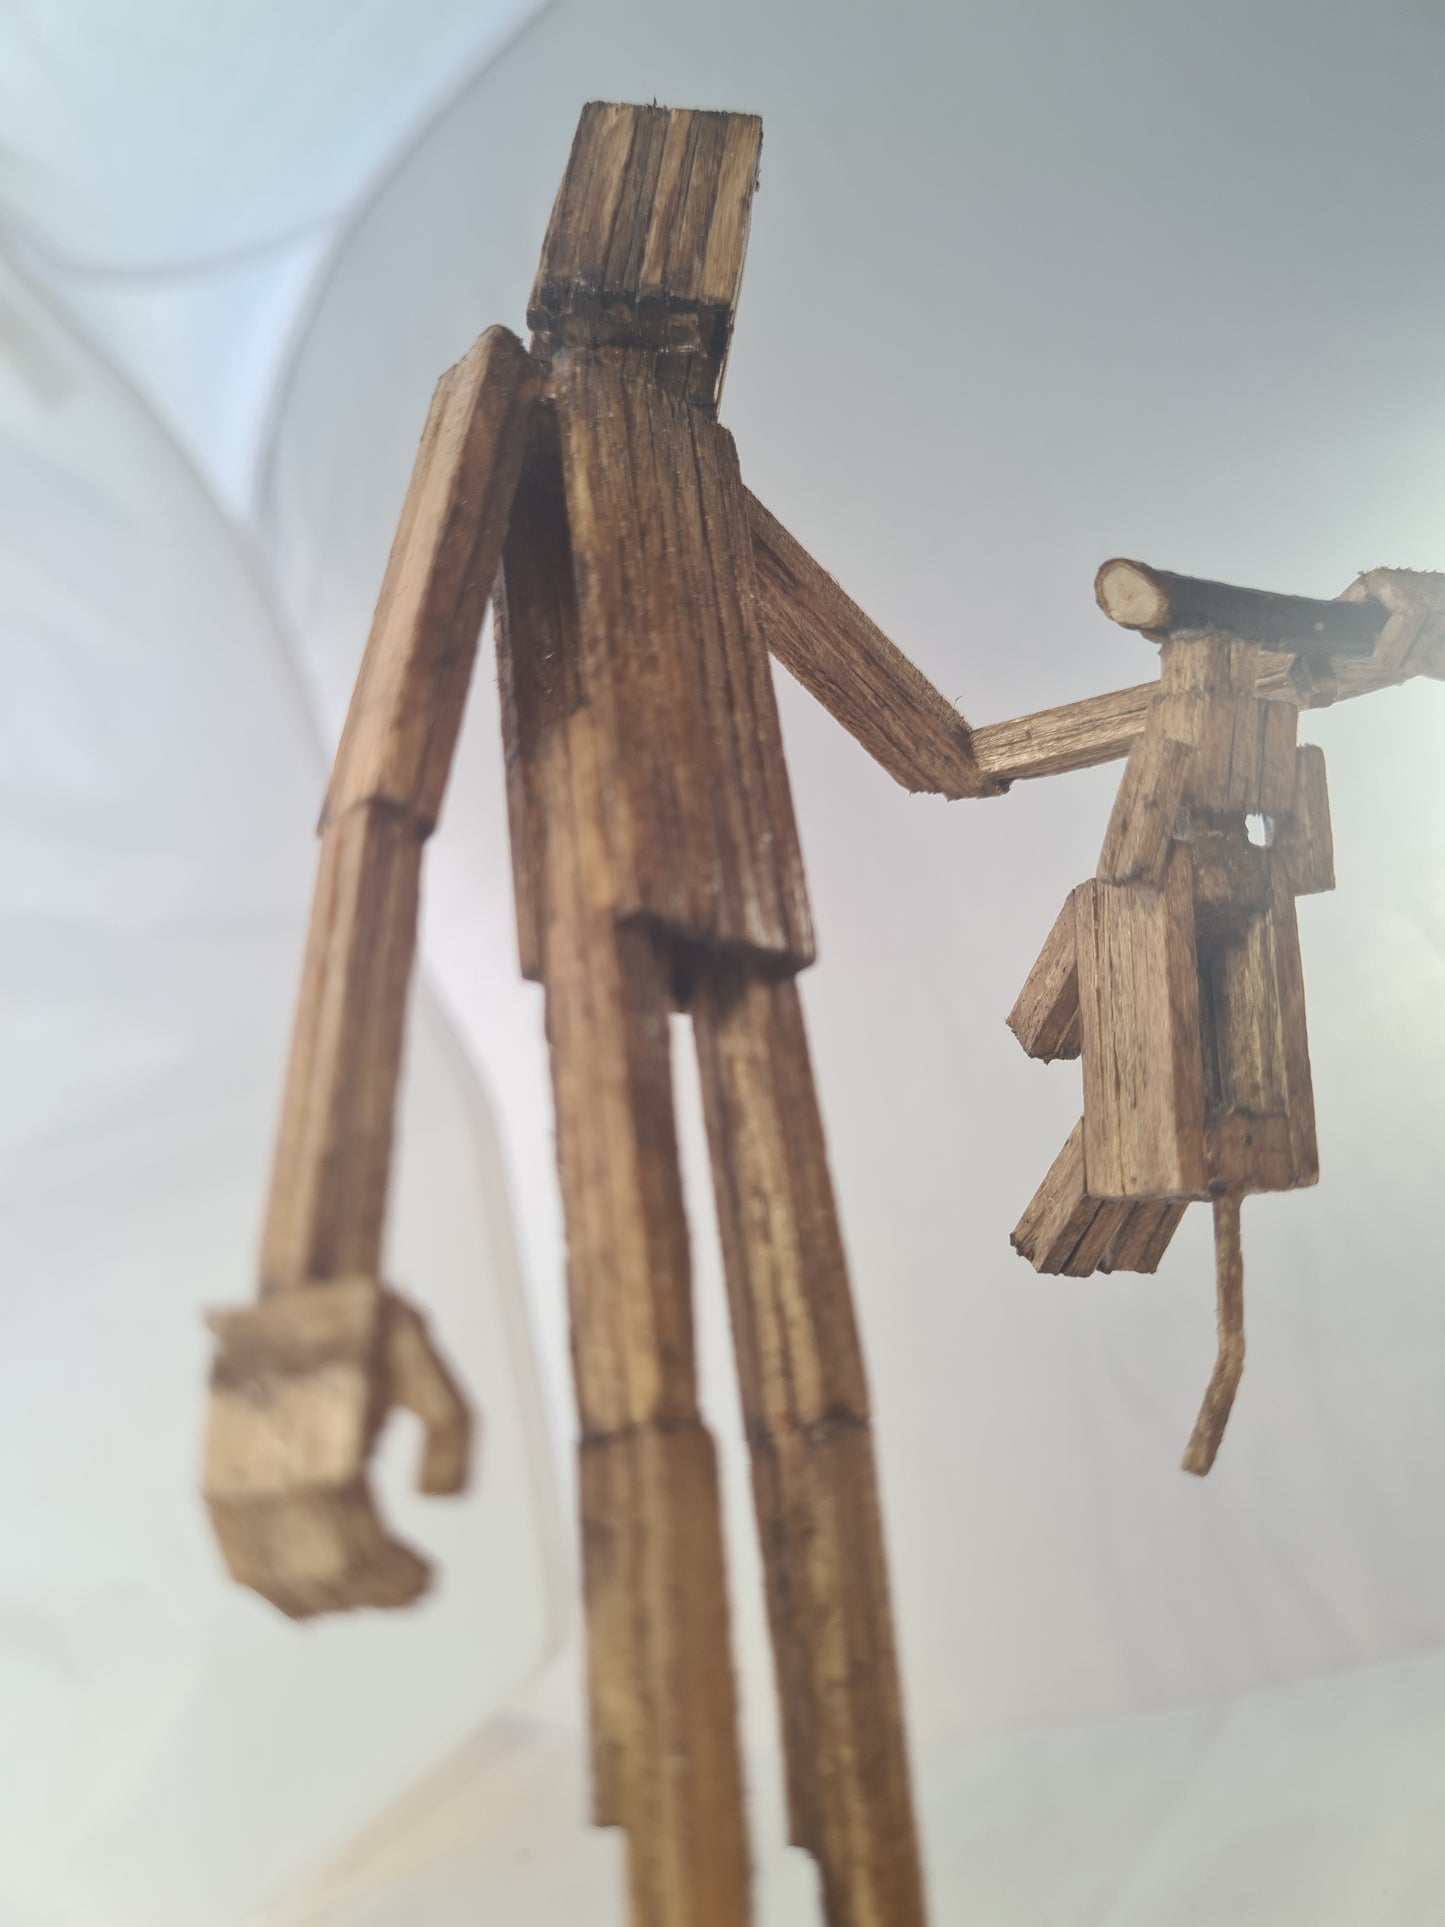 Dog On A Stick - Handcrafted Wooden Matchstick Figures - Gifts, Ornaments and Decor By Tiggidy Designs